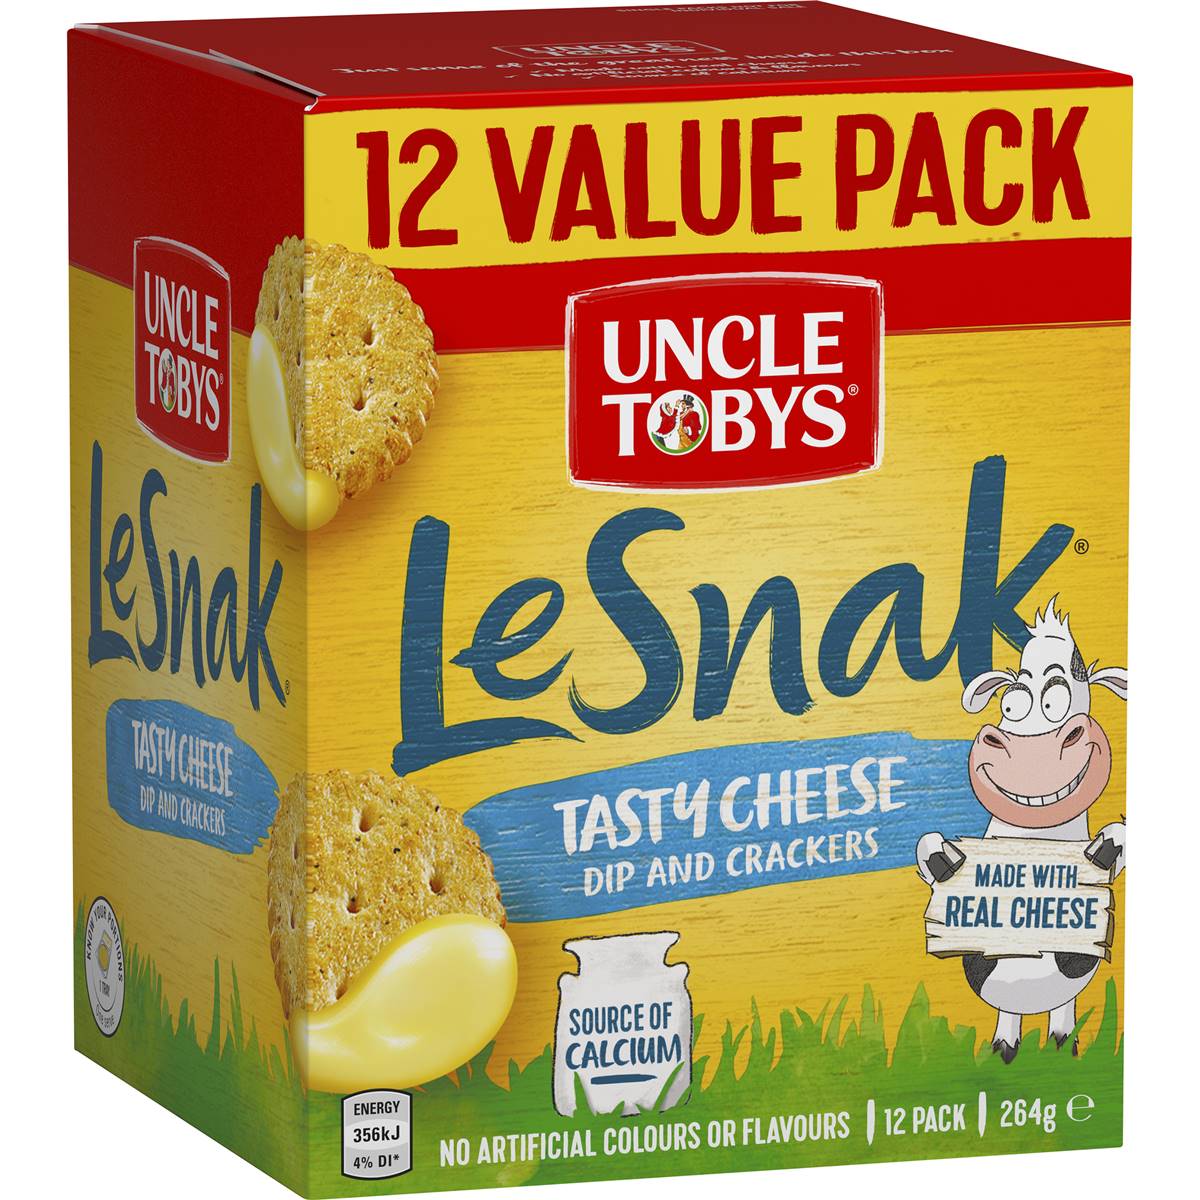 Calories in Uncle Tobys Le Snak Tasty Cheese Dip & Crackers